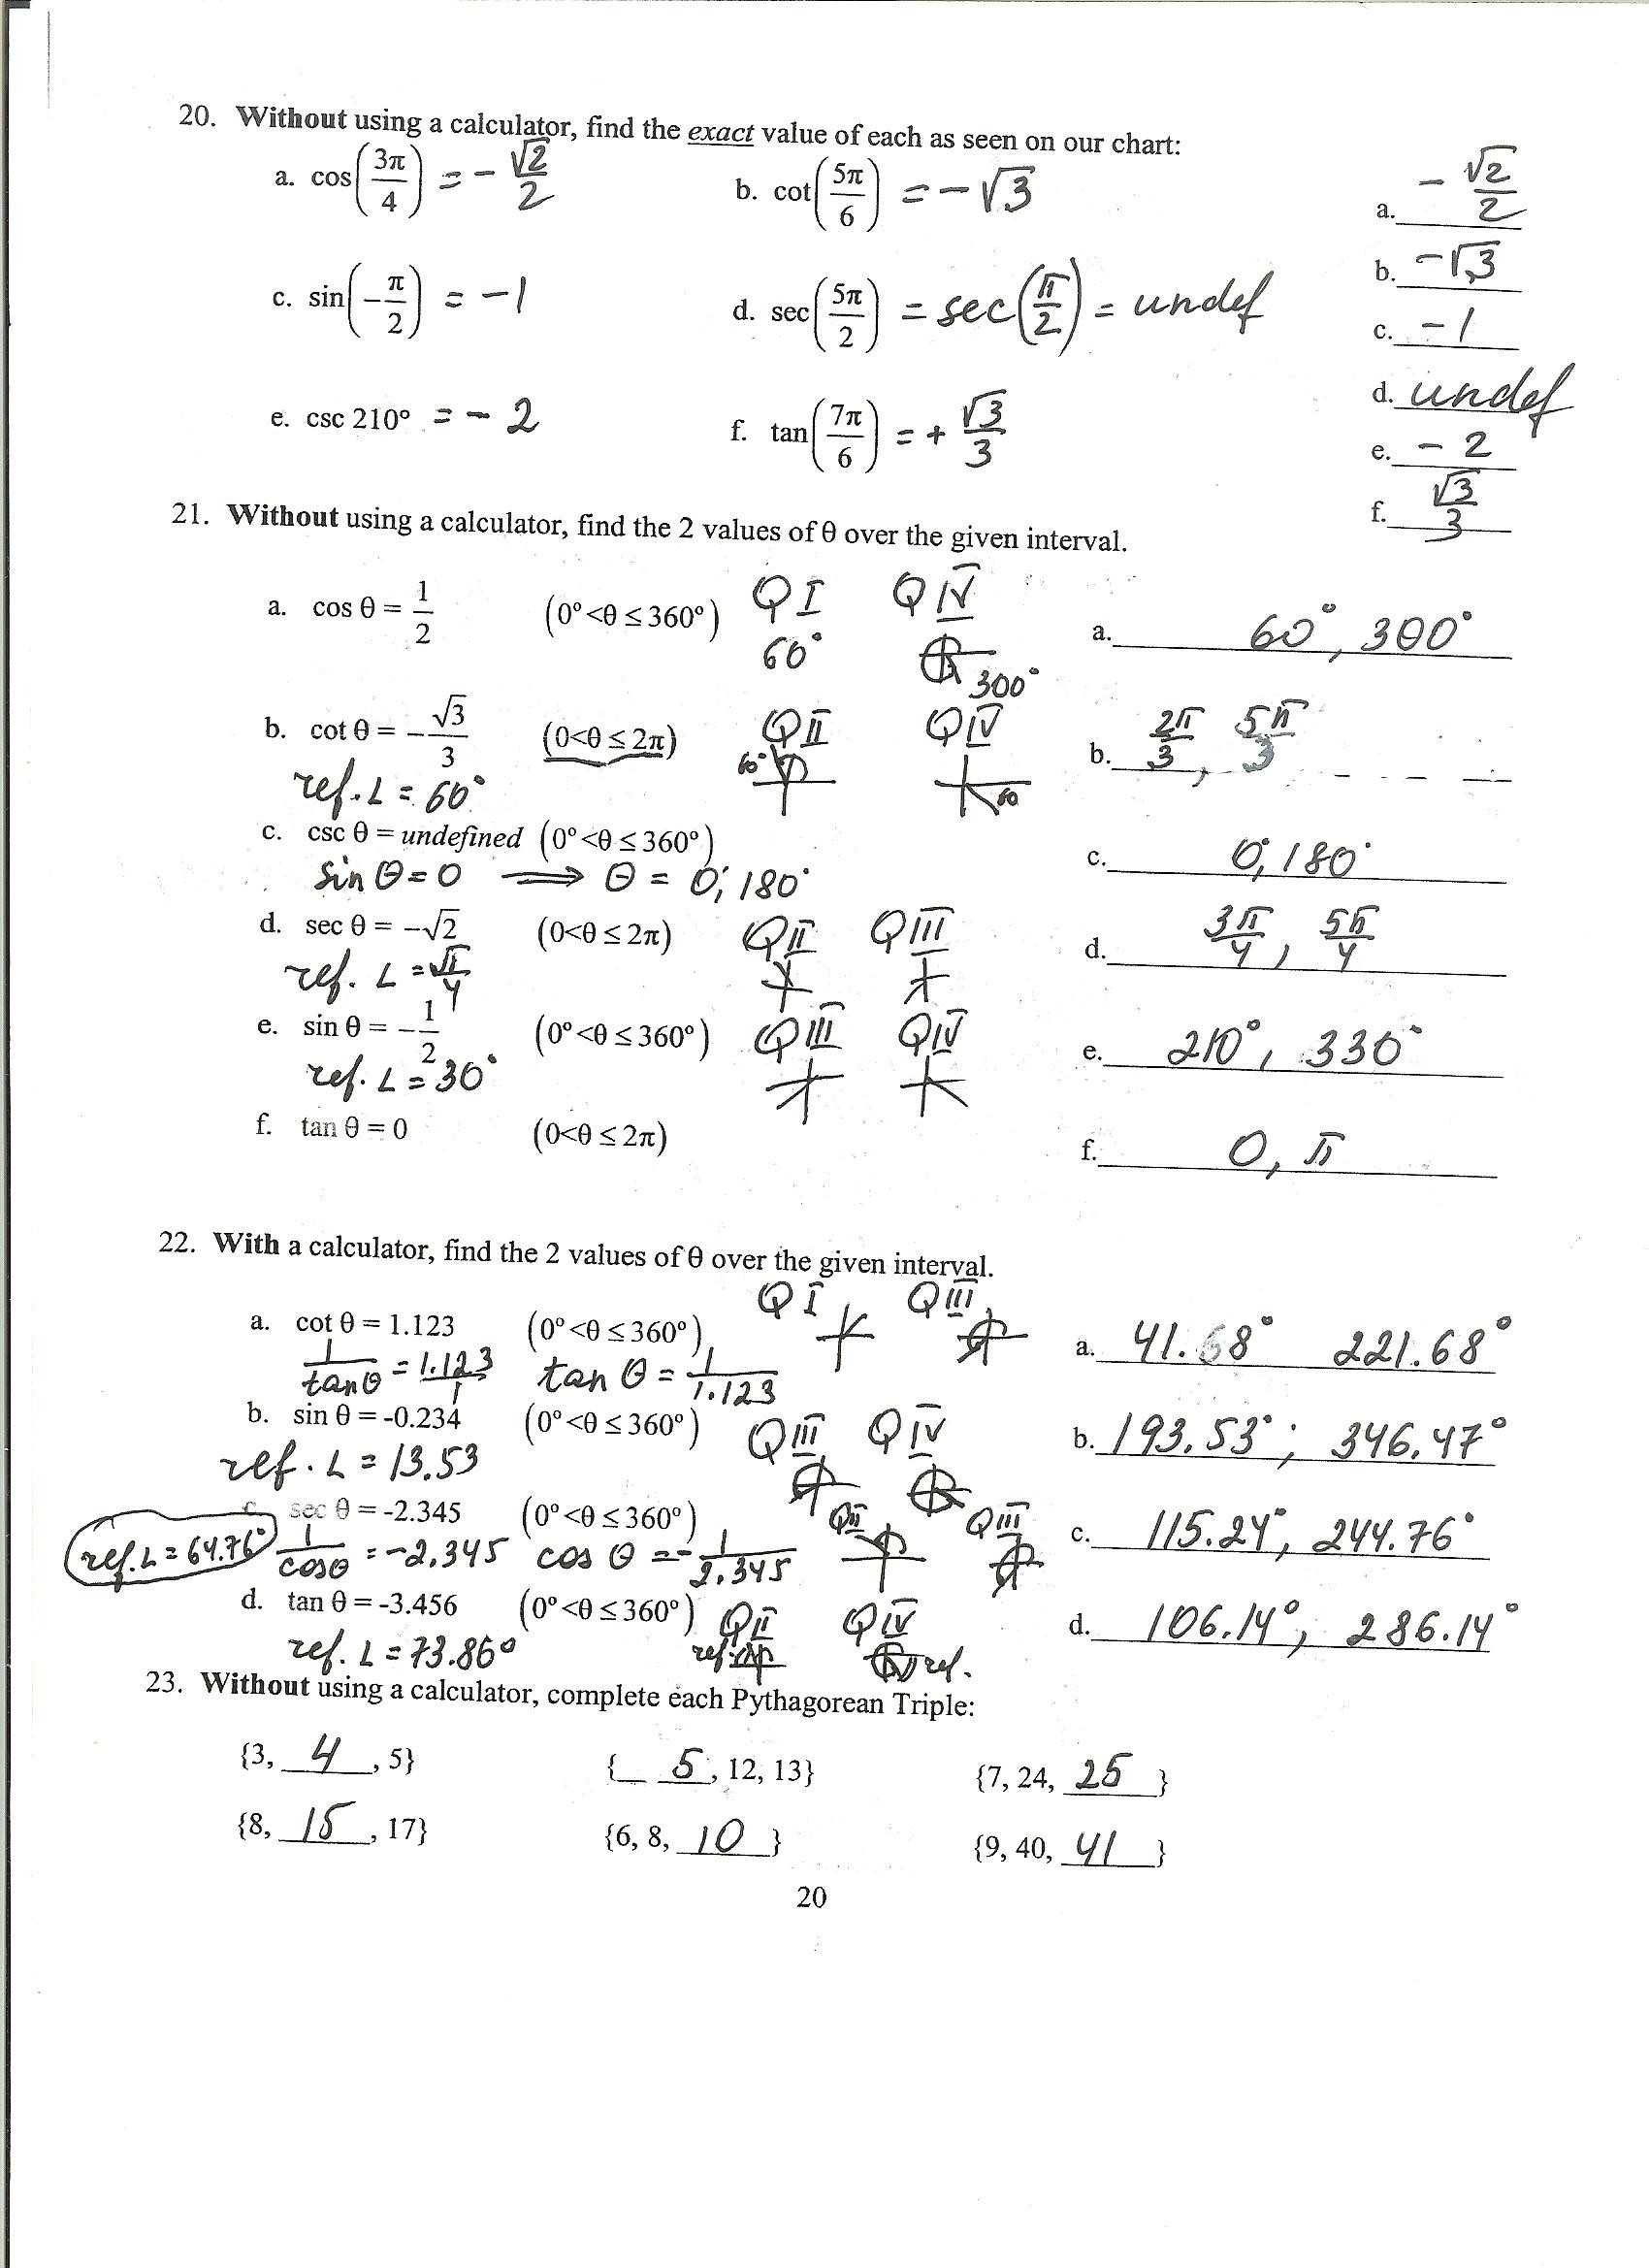 Islam Empire Of Faith Part 1 Worksheet Answers as Well as Extended Algebra 1 Functions Worksheet 4 Answers Fresh 2833 Best